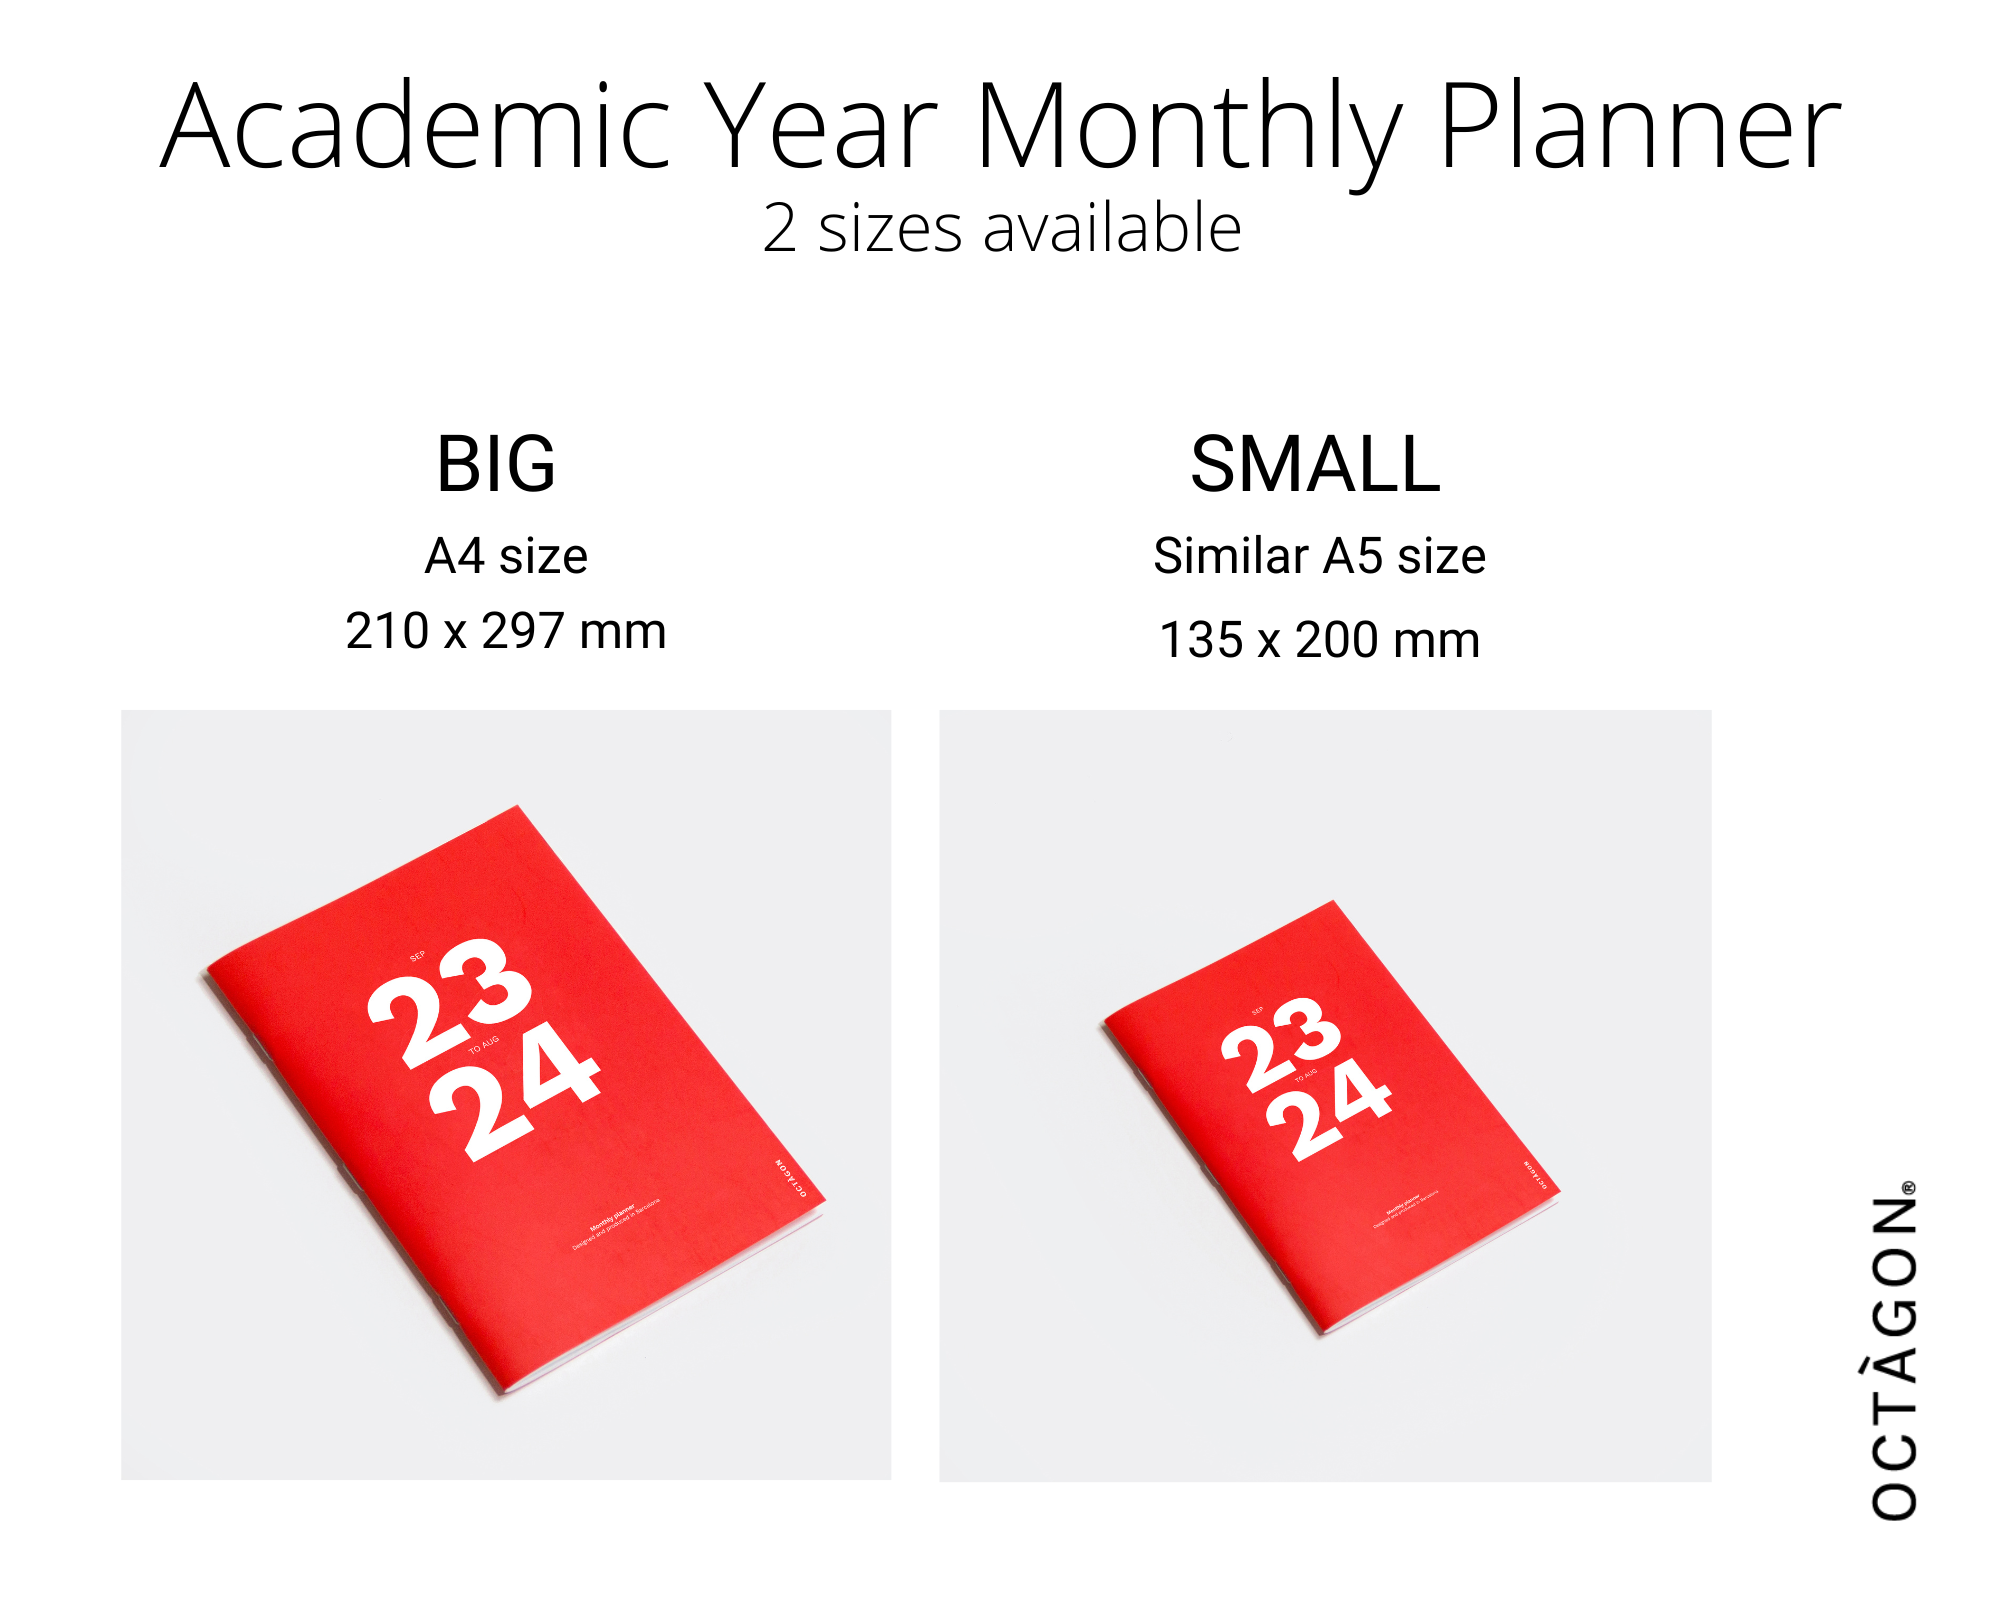 OCTÀGON DESIGN | Academic Year Monthly planner (2 sizes available) | BIG: A4 size 210x297mm | SMALL: SImilar A5 size 135x200mm